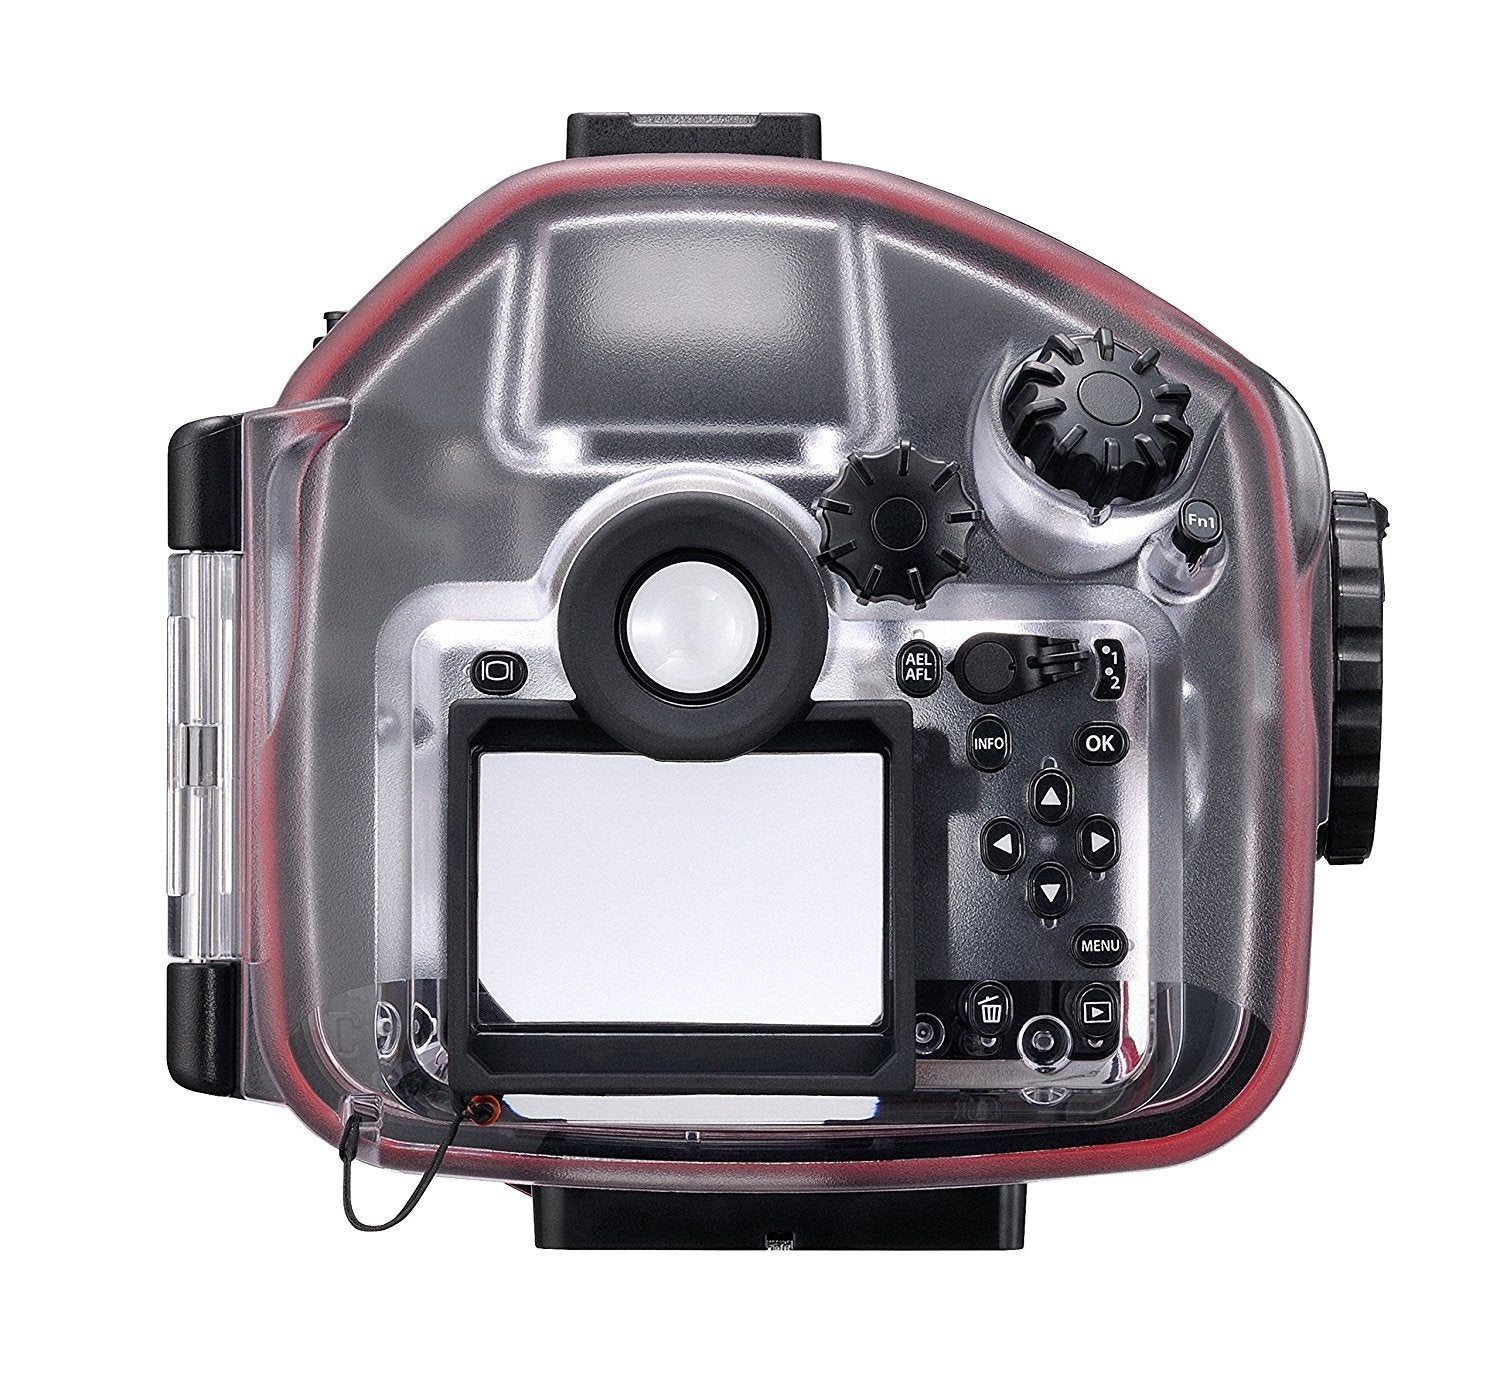 Olympus PT-EP14 Underwater Housing for E-M1MKII